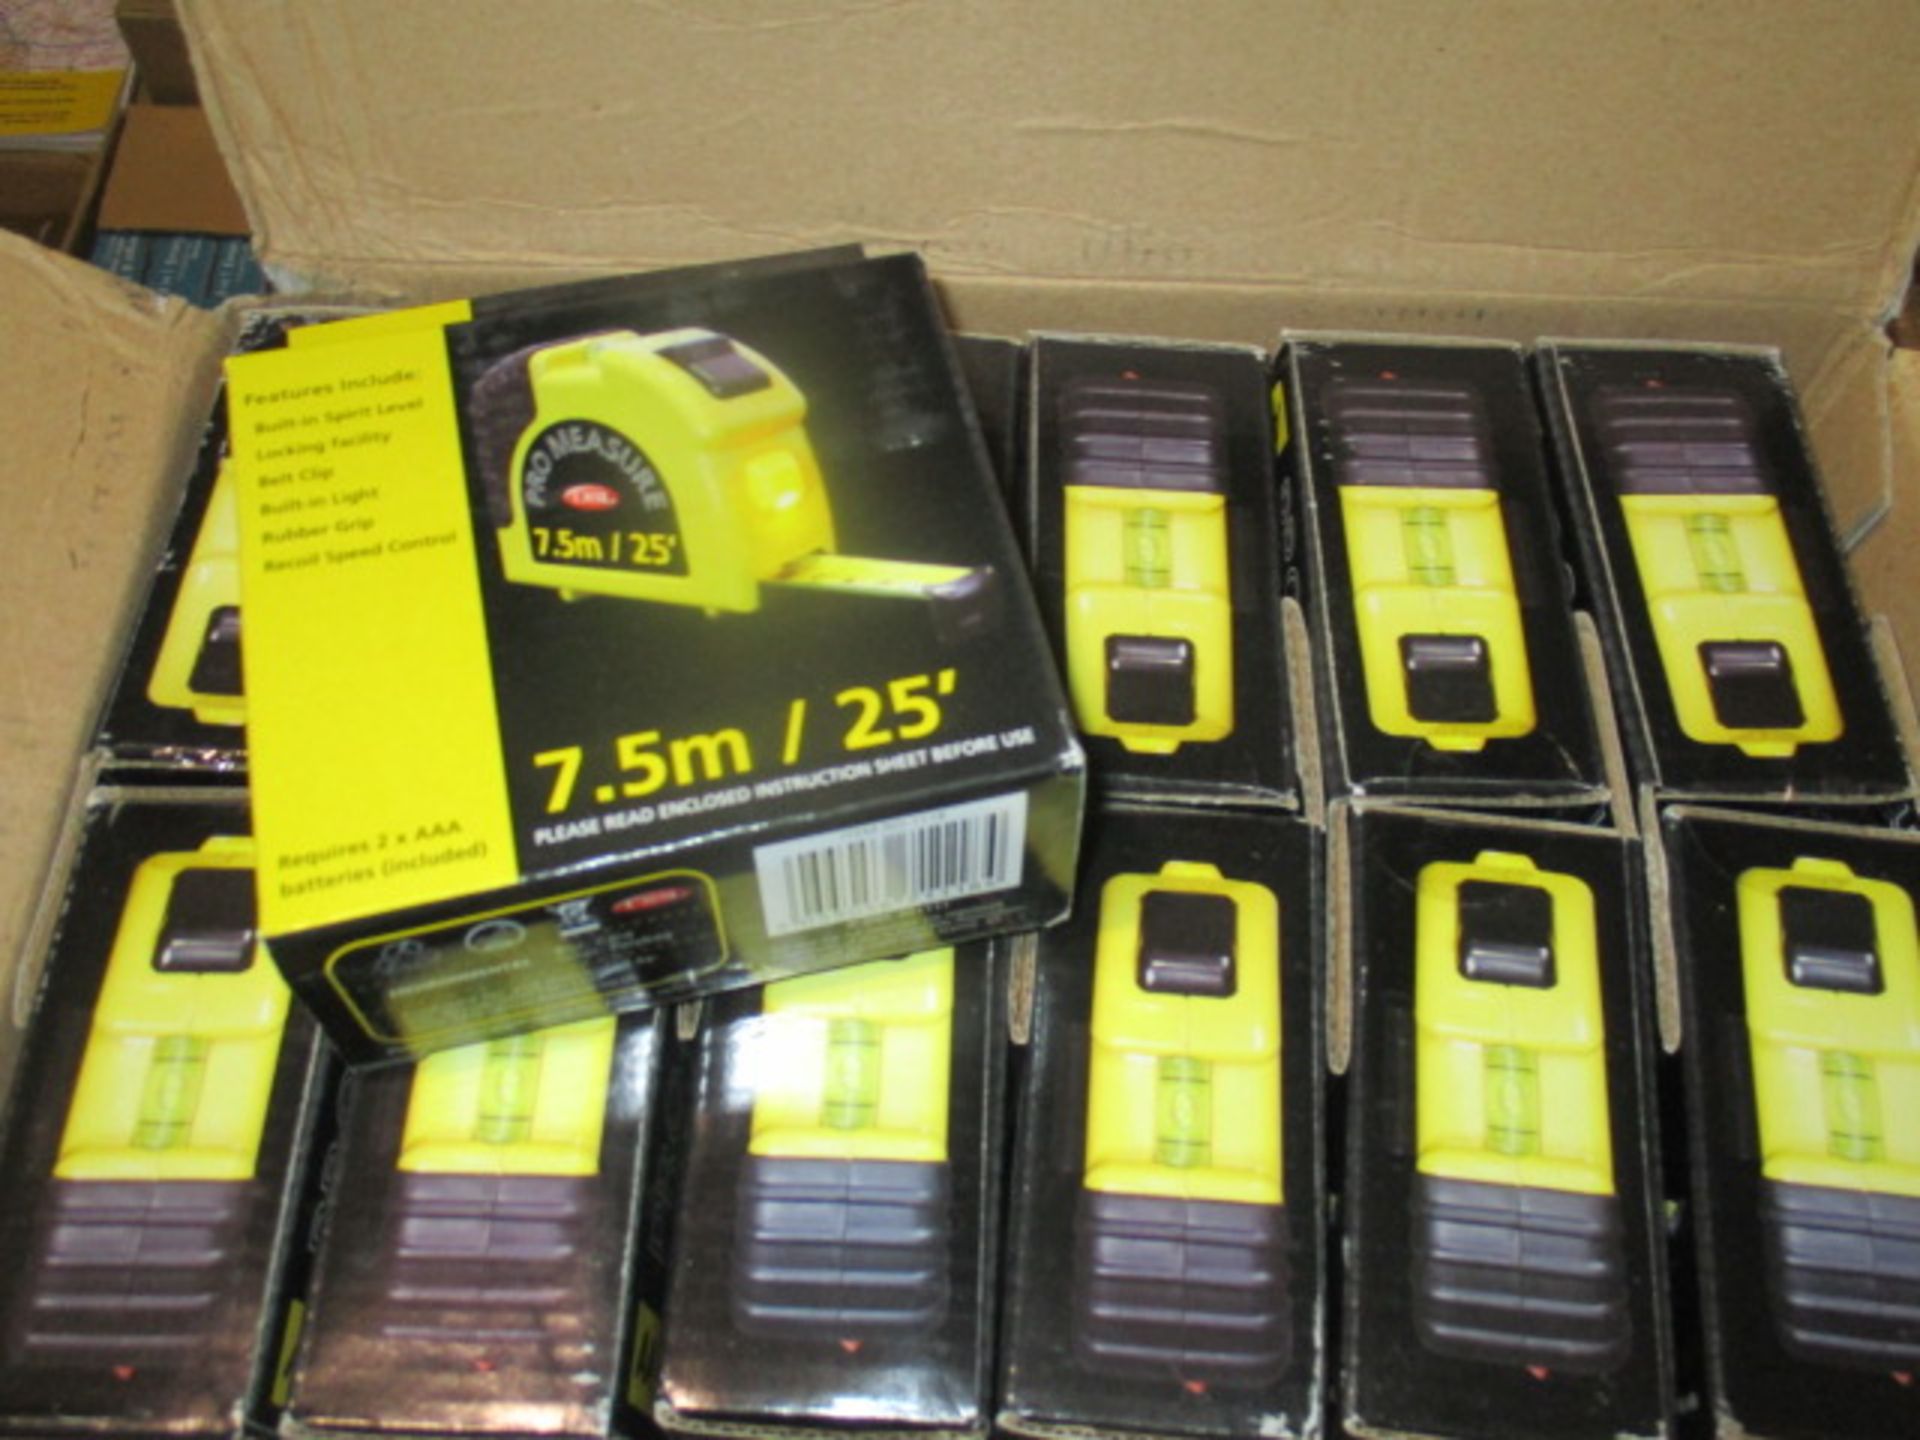 10pcs in lot brand new AA pro tape measure with accessories - spirit level , light , belt clip ,